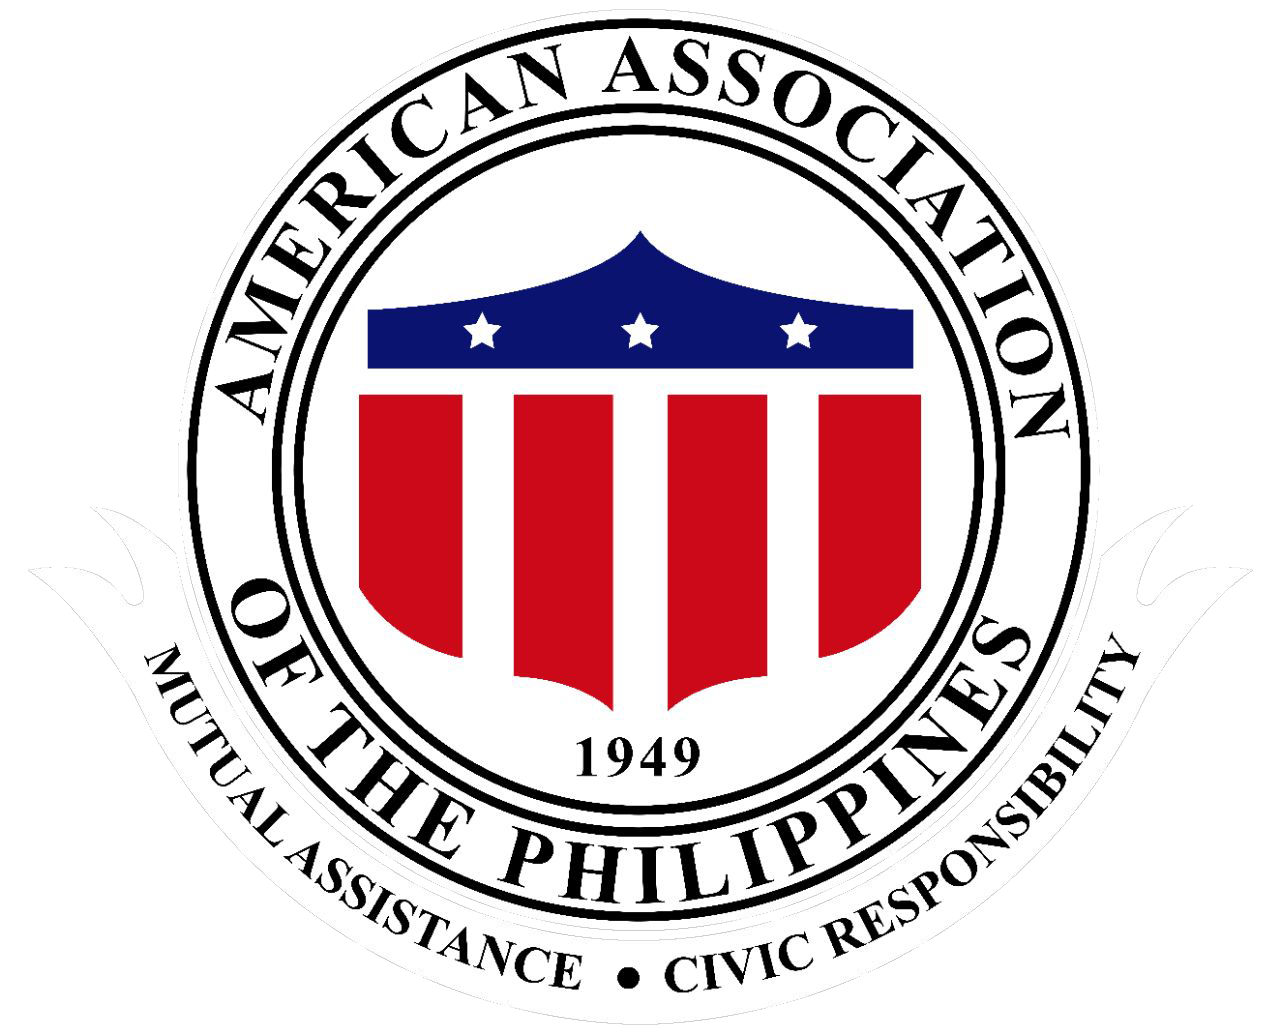 The American Association of the Philippines